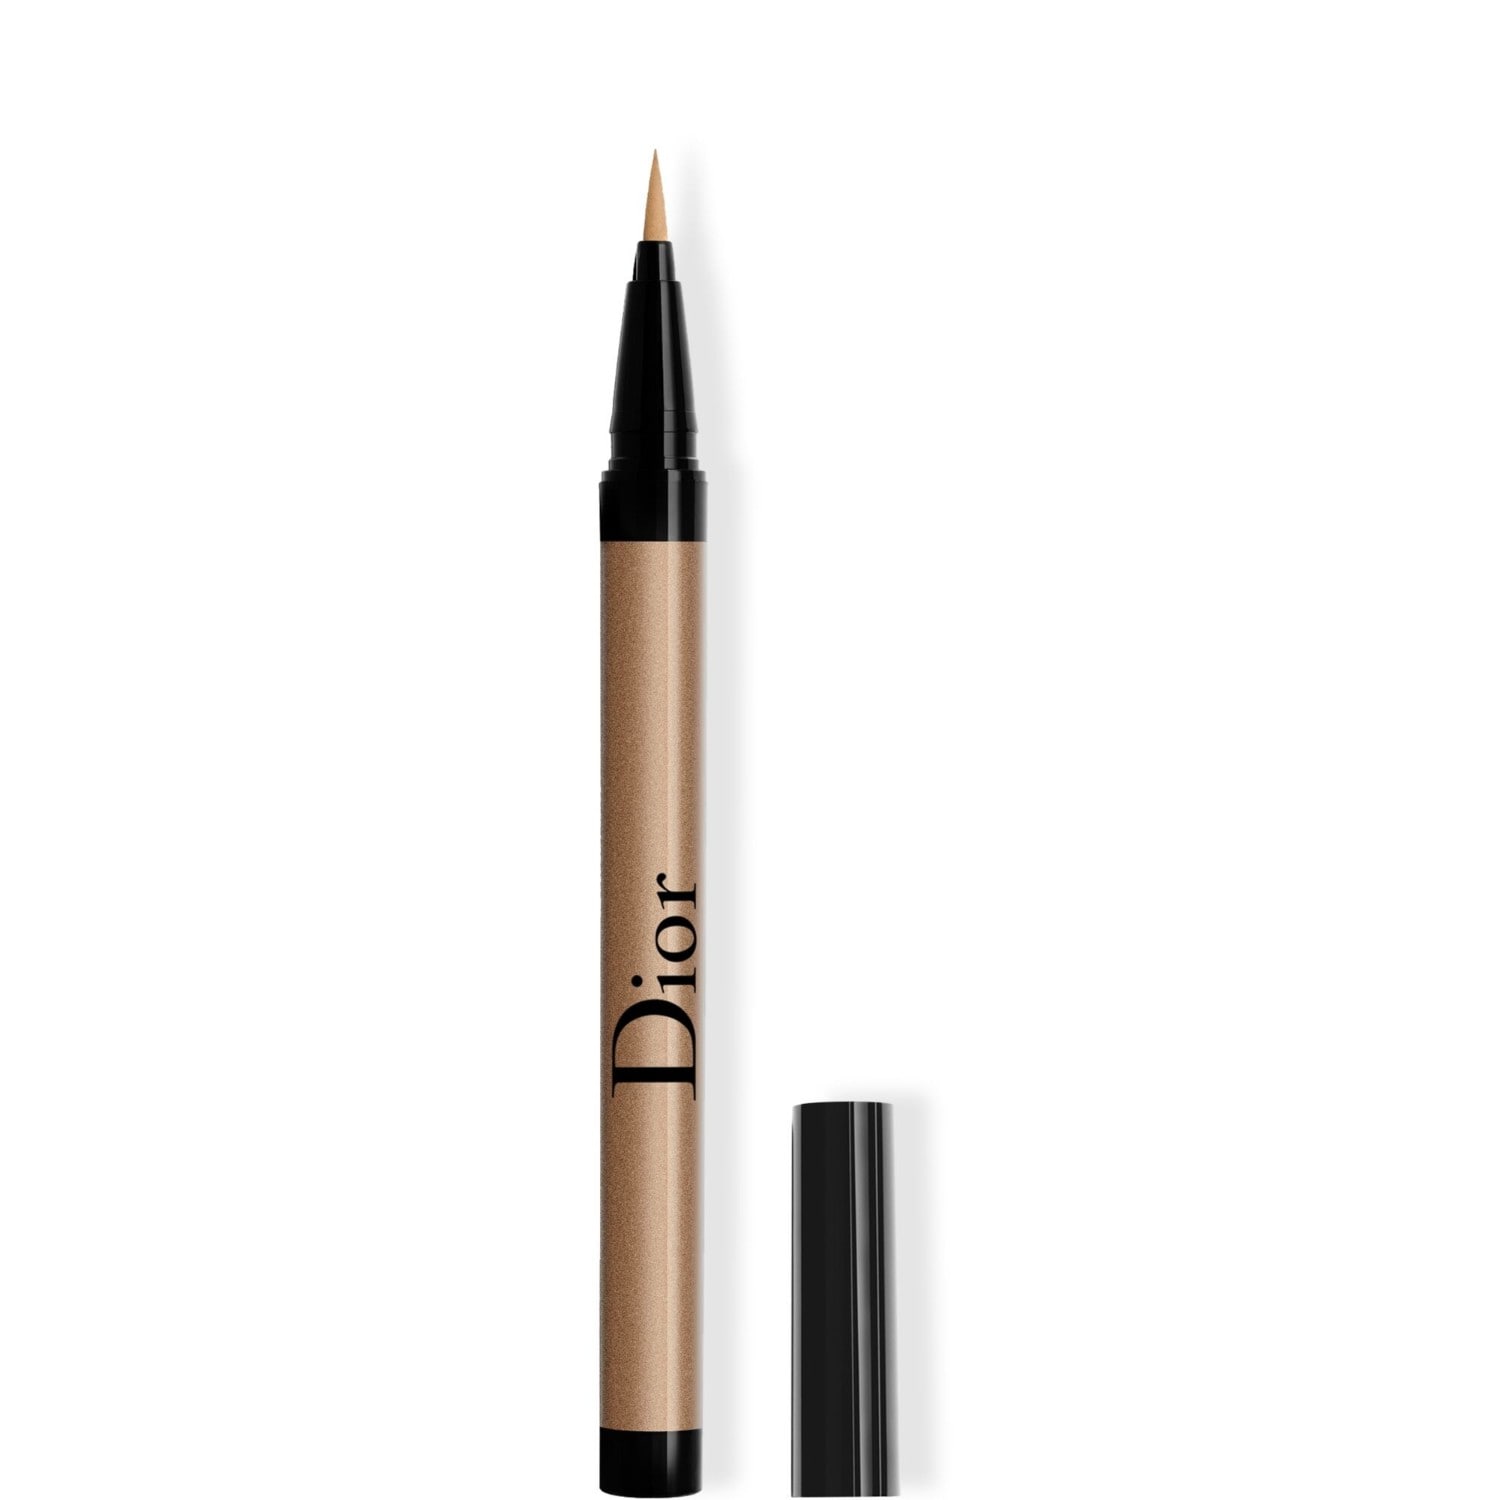 Dior Diorshow on Stage Liner, No. 551 - Pearly Bronze